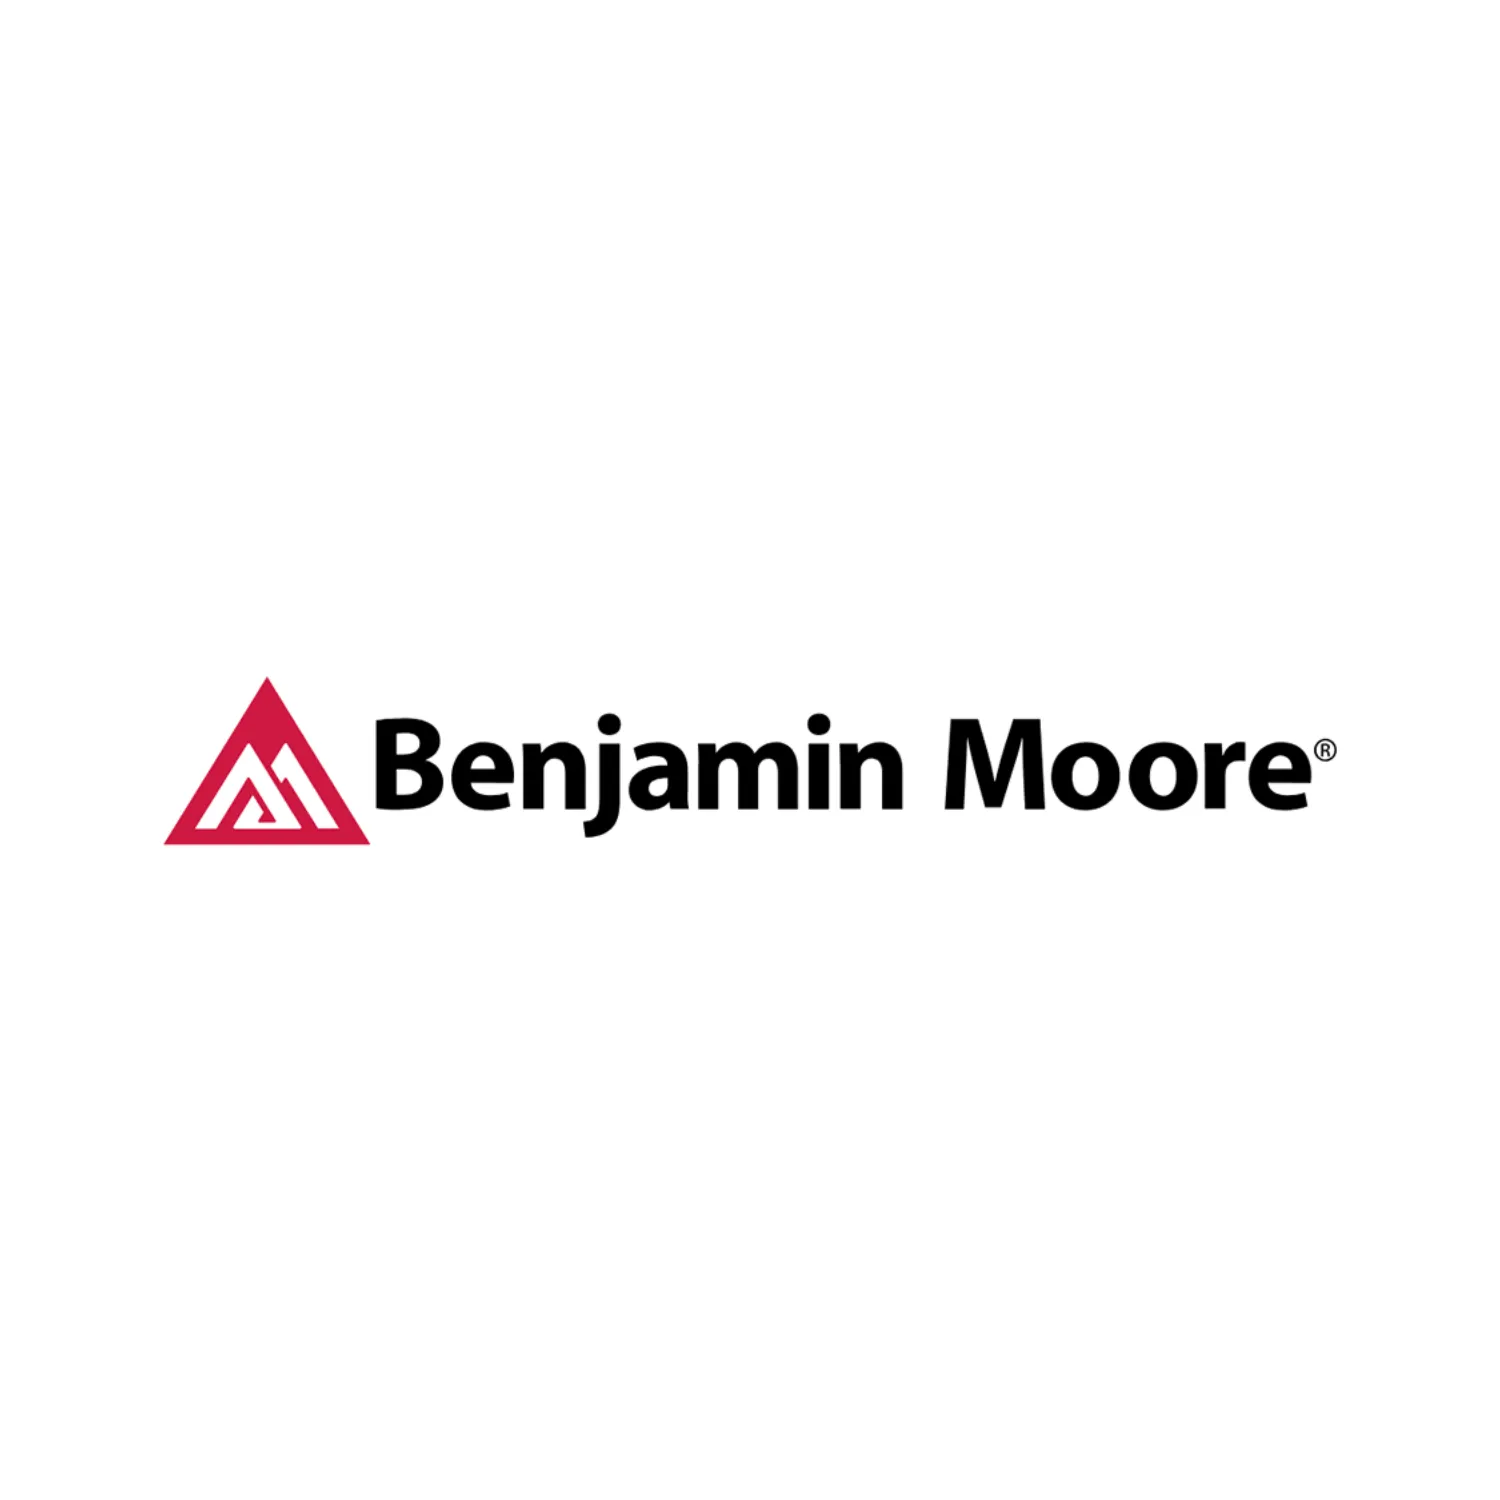 Database of Benjamin Moore Locations in the United States